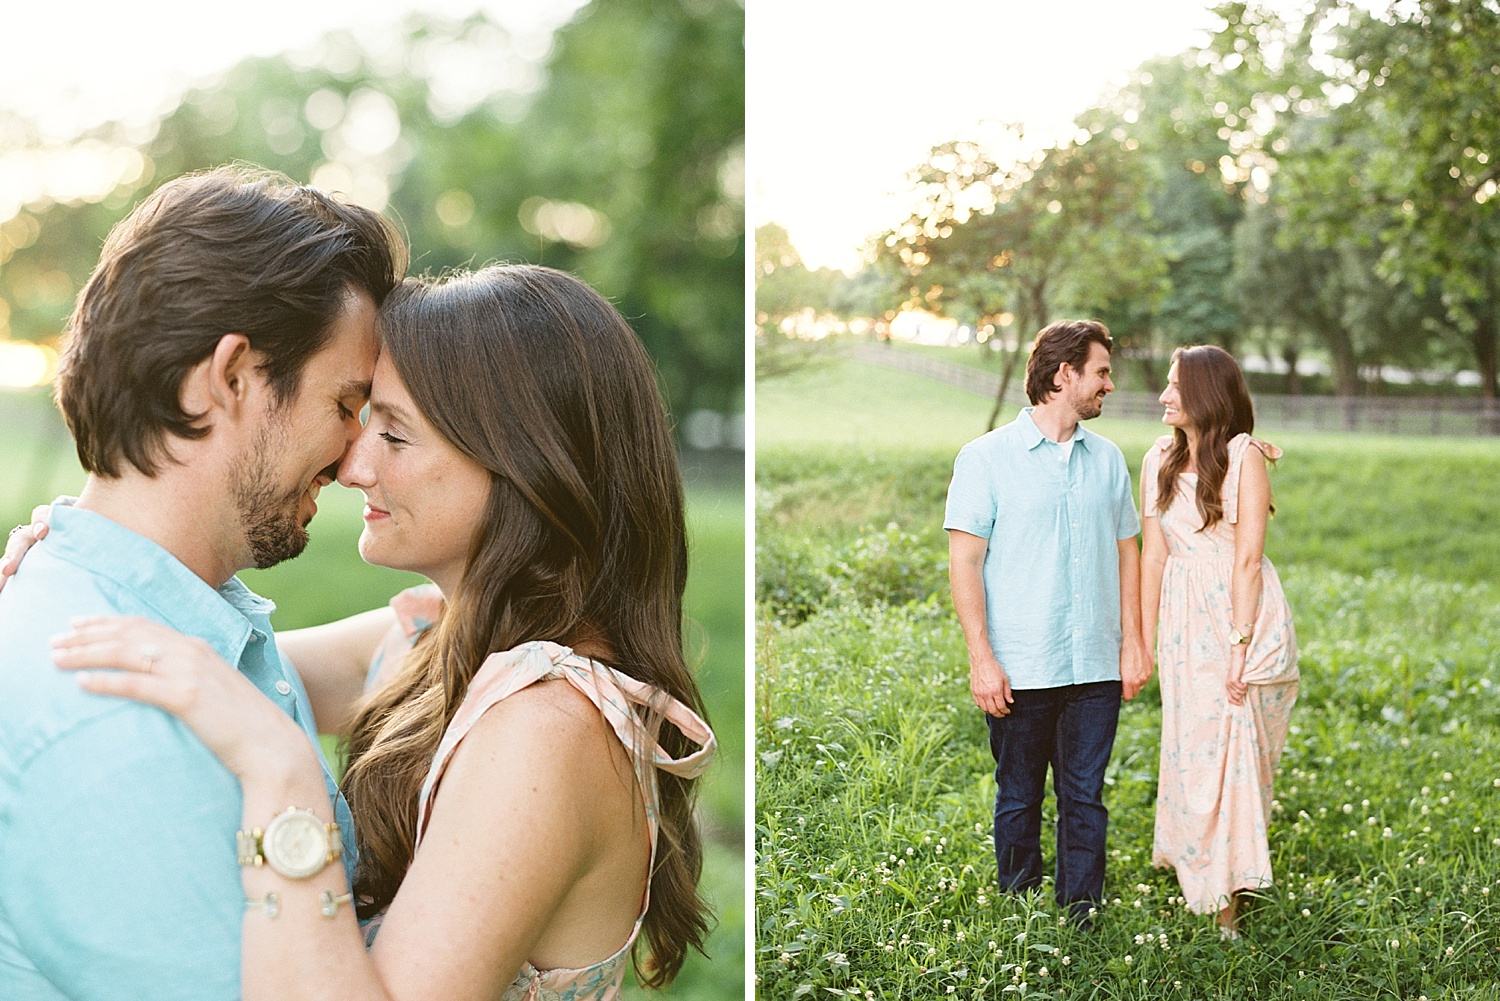 Downtown Lexington Engagement Session Talon Winery Picnic Engagement Session Gal Meets Glam Anthropologie Dress Laura Bodnar Photography Lexington Wedding Photographer Film Photography_0018-1.jpg